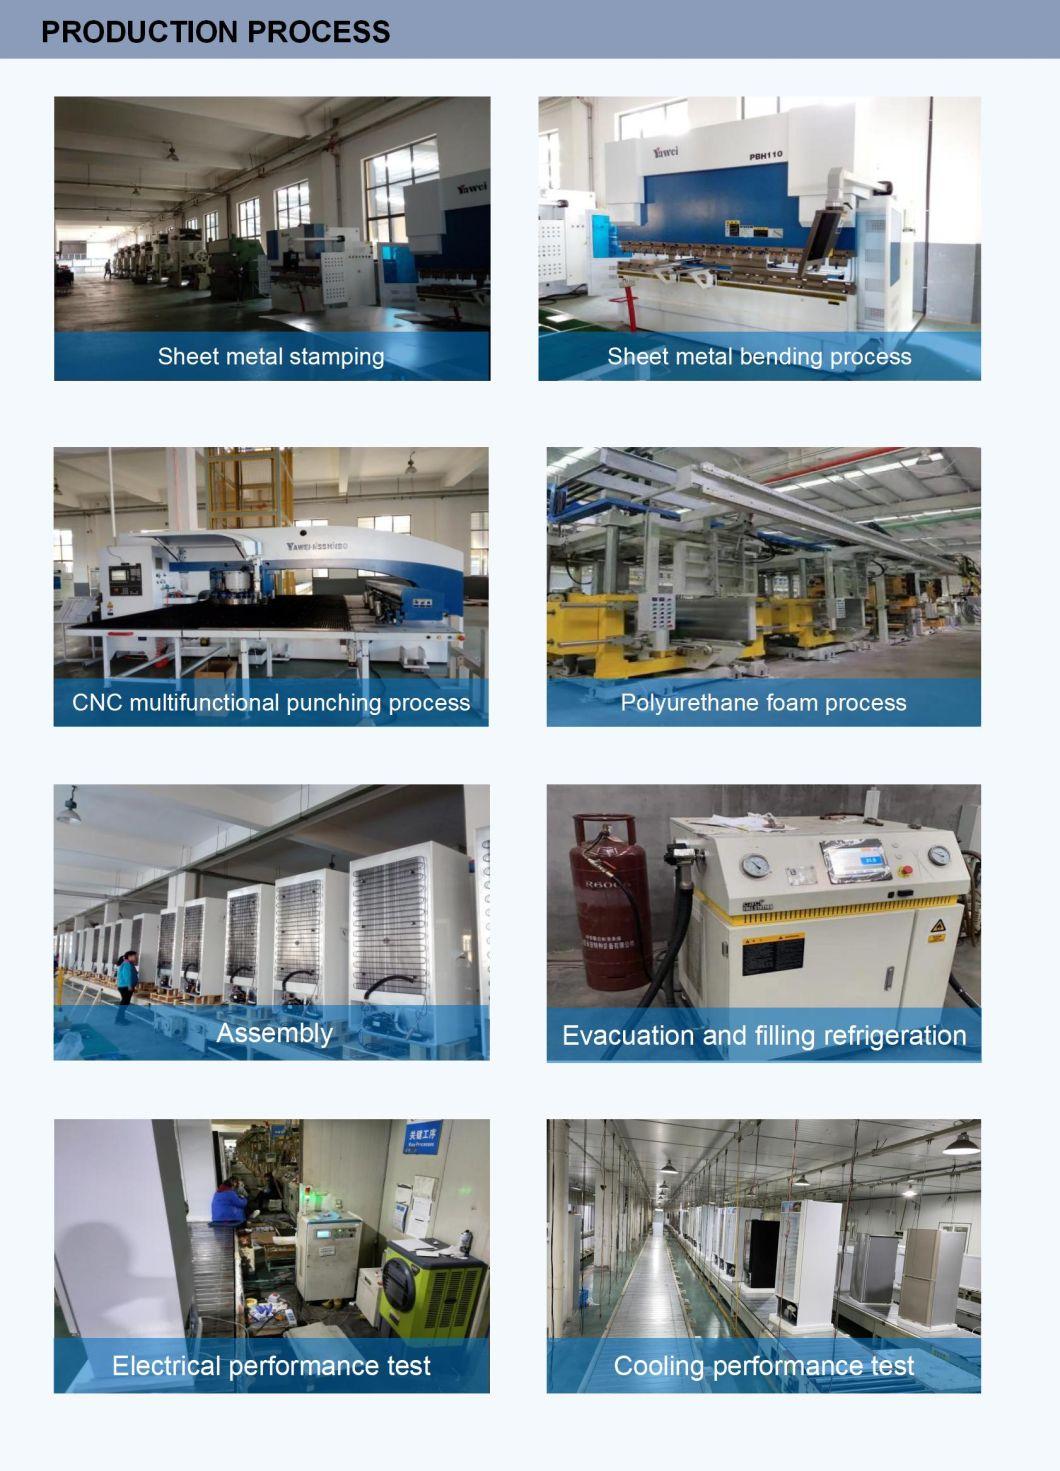 All-Round Refrigeration Direct Cooling Glass Display Showcase with Brand Compressor